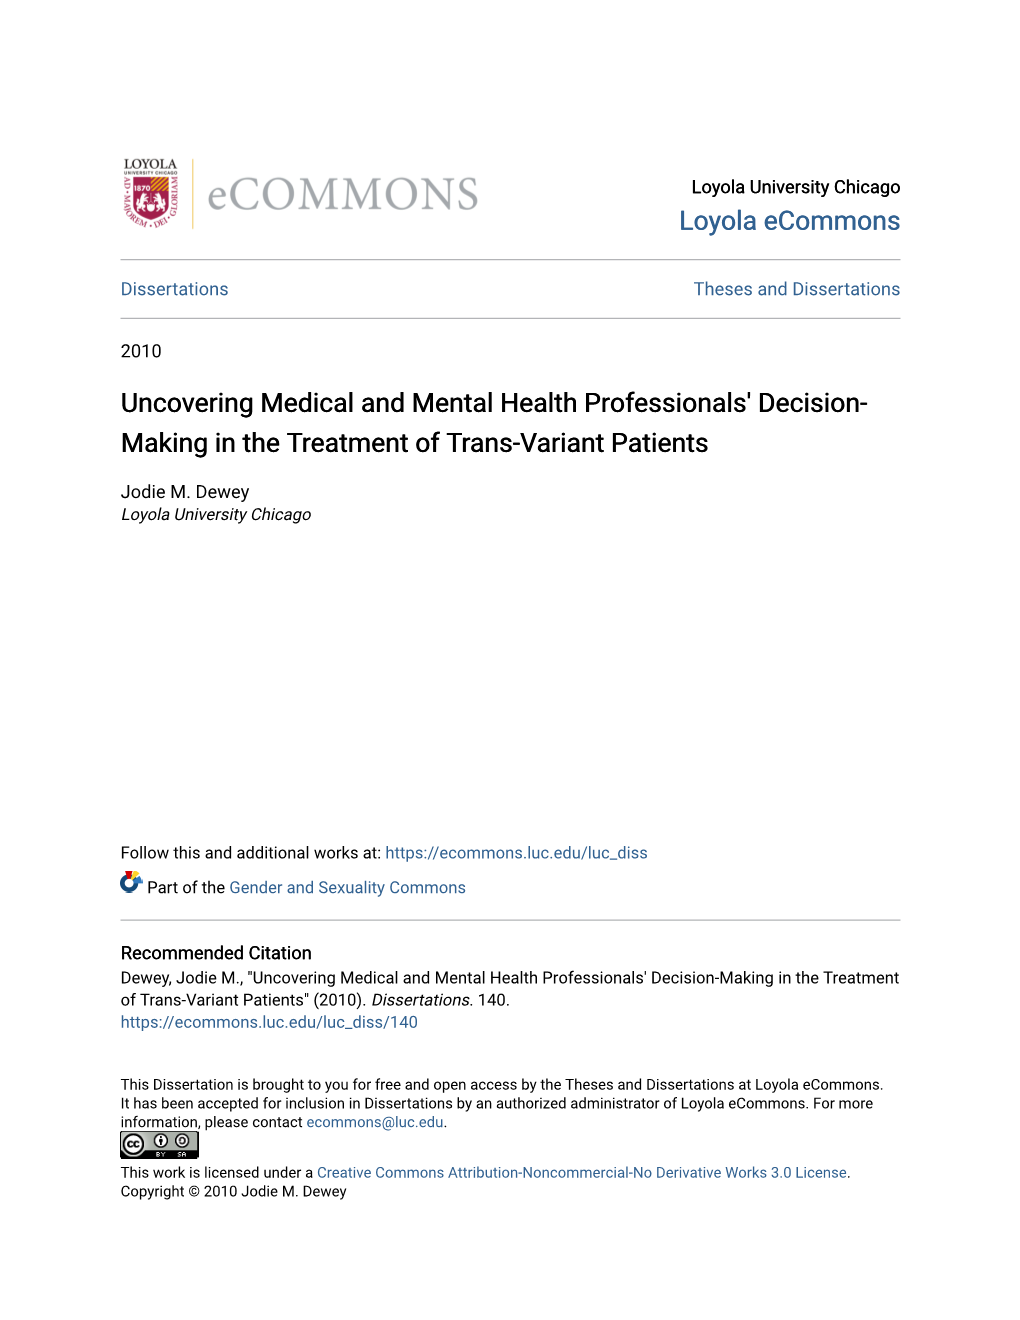 Uncovering Medical and Mental Health Professionals' Decision- Making in the Treatment of Trans-Variant Patients